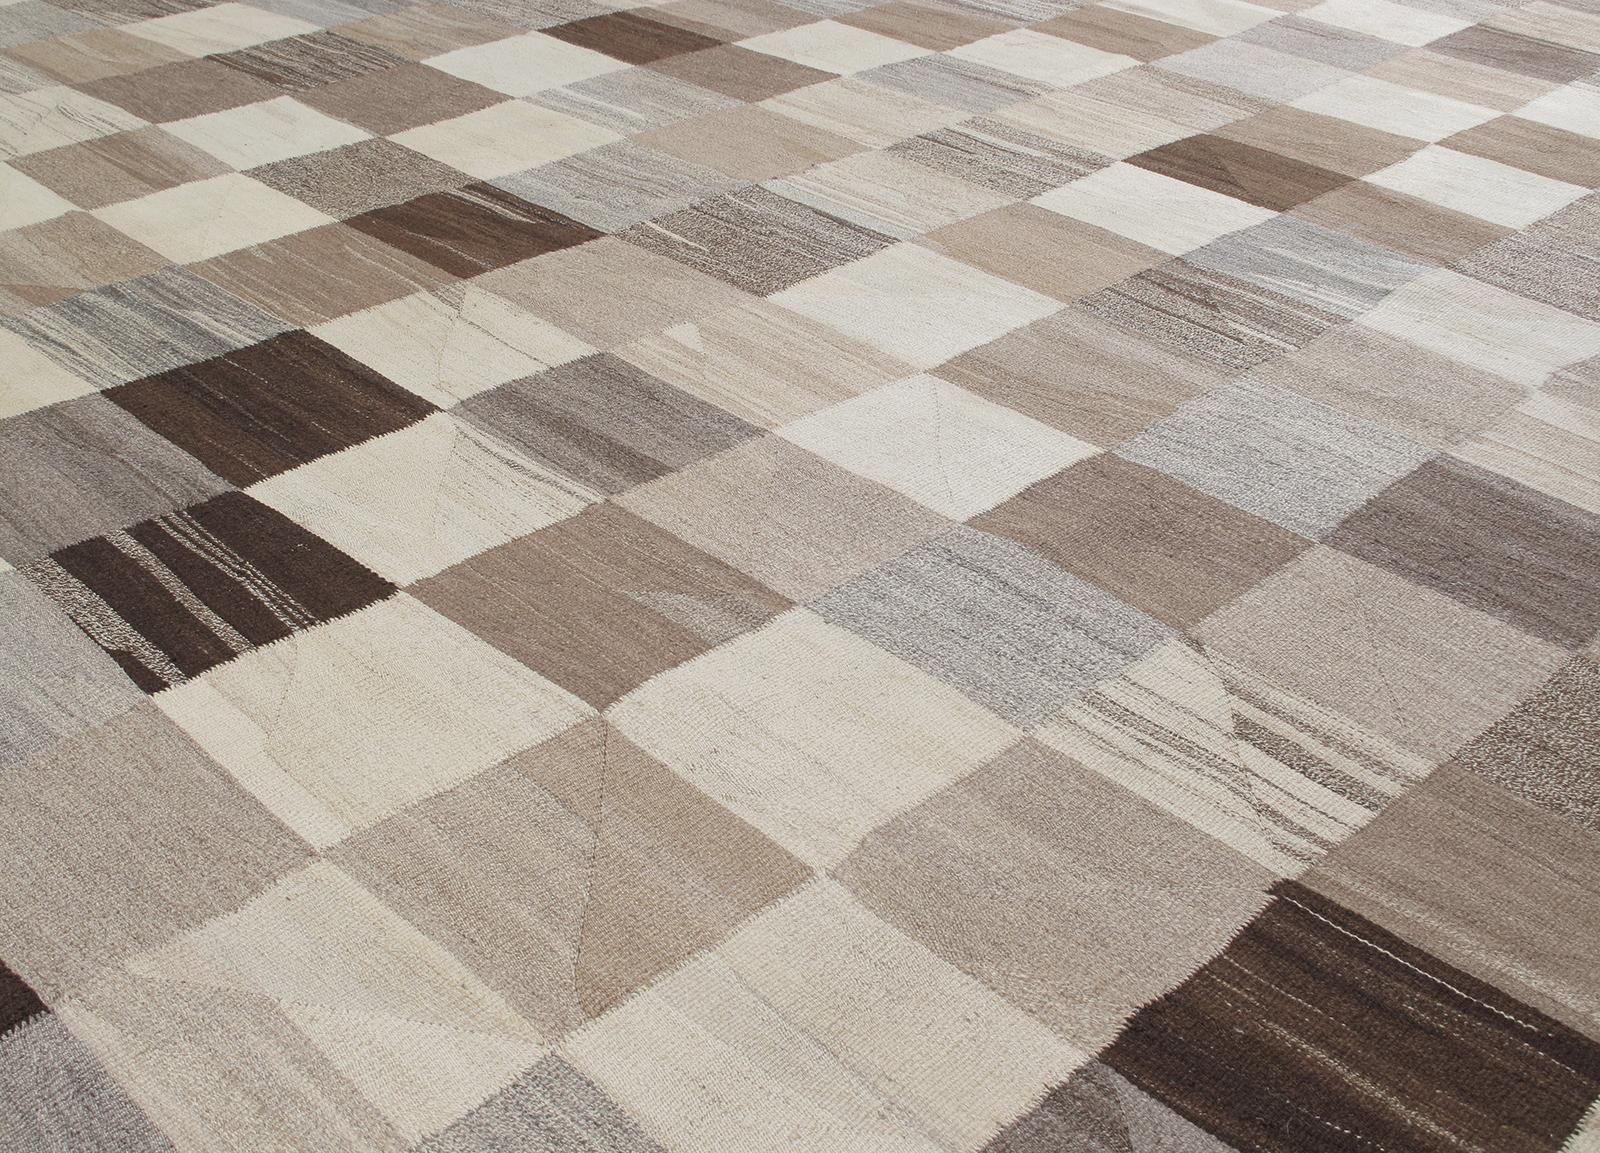 This modern flat-weave rug is made with 100% handspun, non-dyed Persian wool. It features a checkered pattern all made of undyed wool ranging from beige, browns, taupes, and greys. It is inspired by the vintage Kilim that are native to the Shiraz